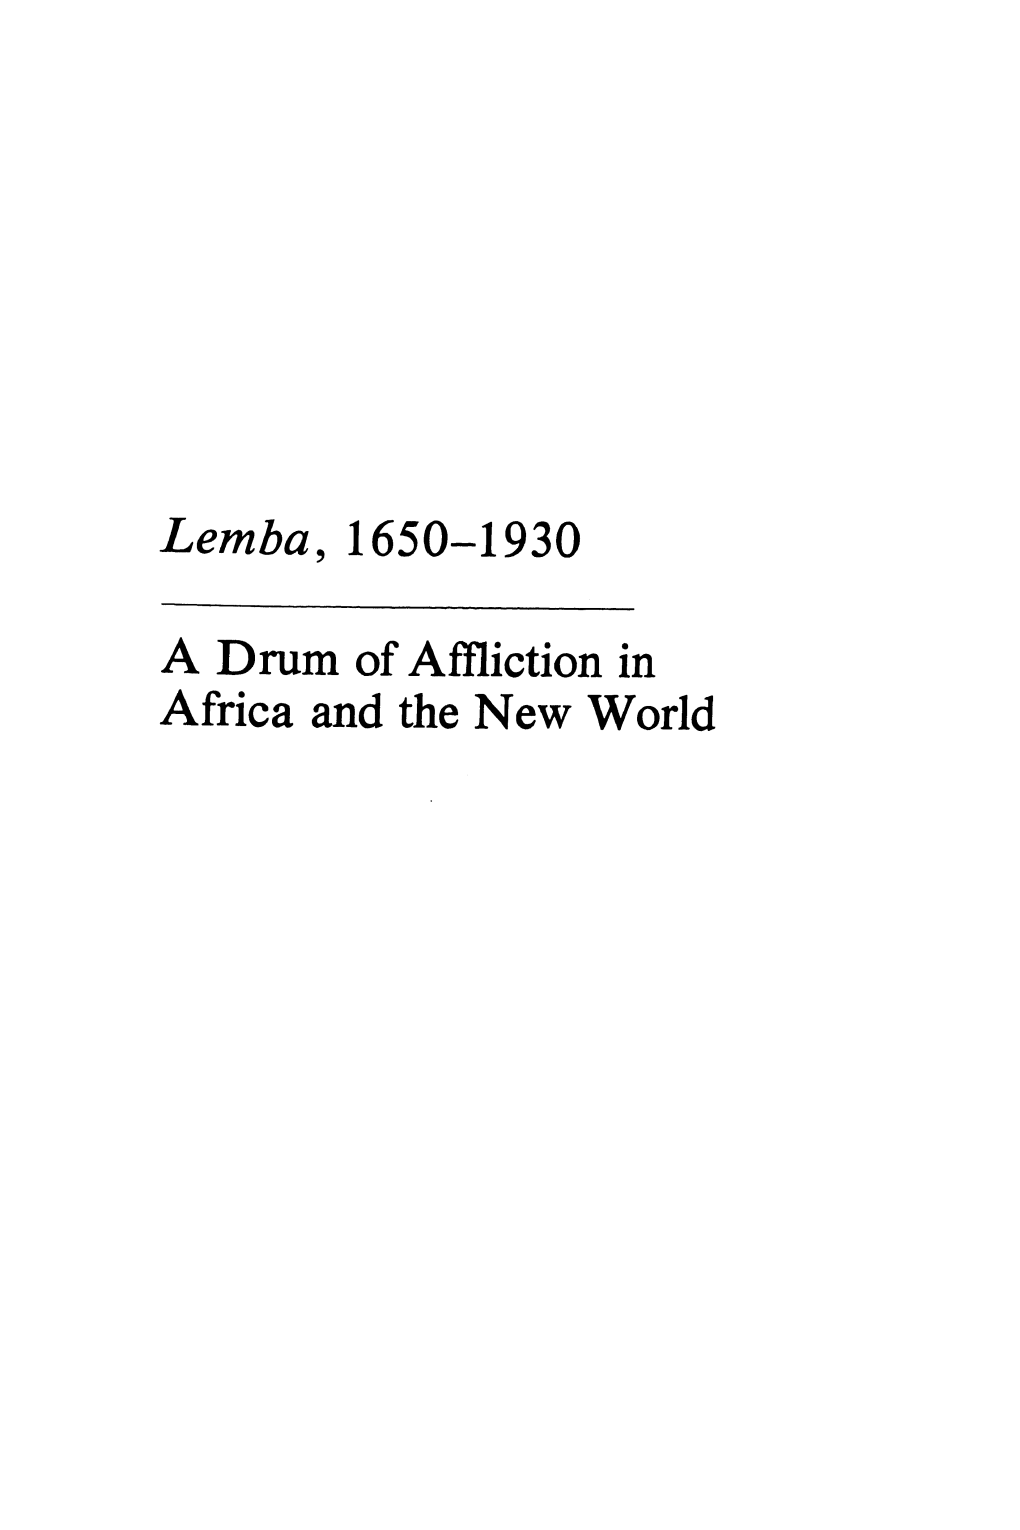 Lemba, 1650-1930 a Drum of Affliction in Africa and the New World